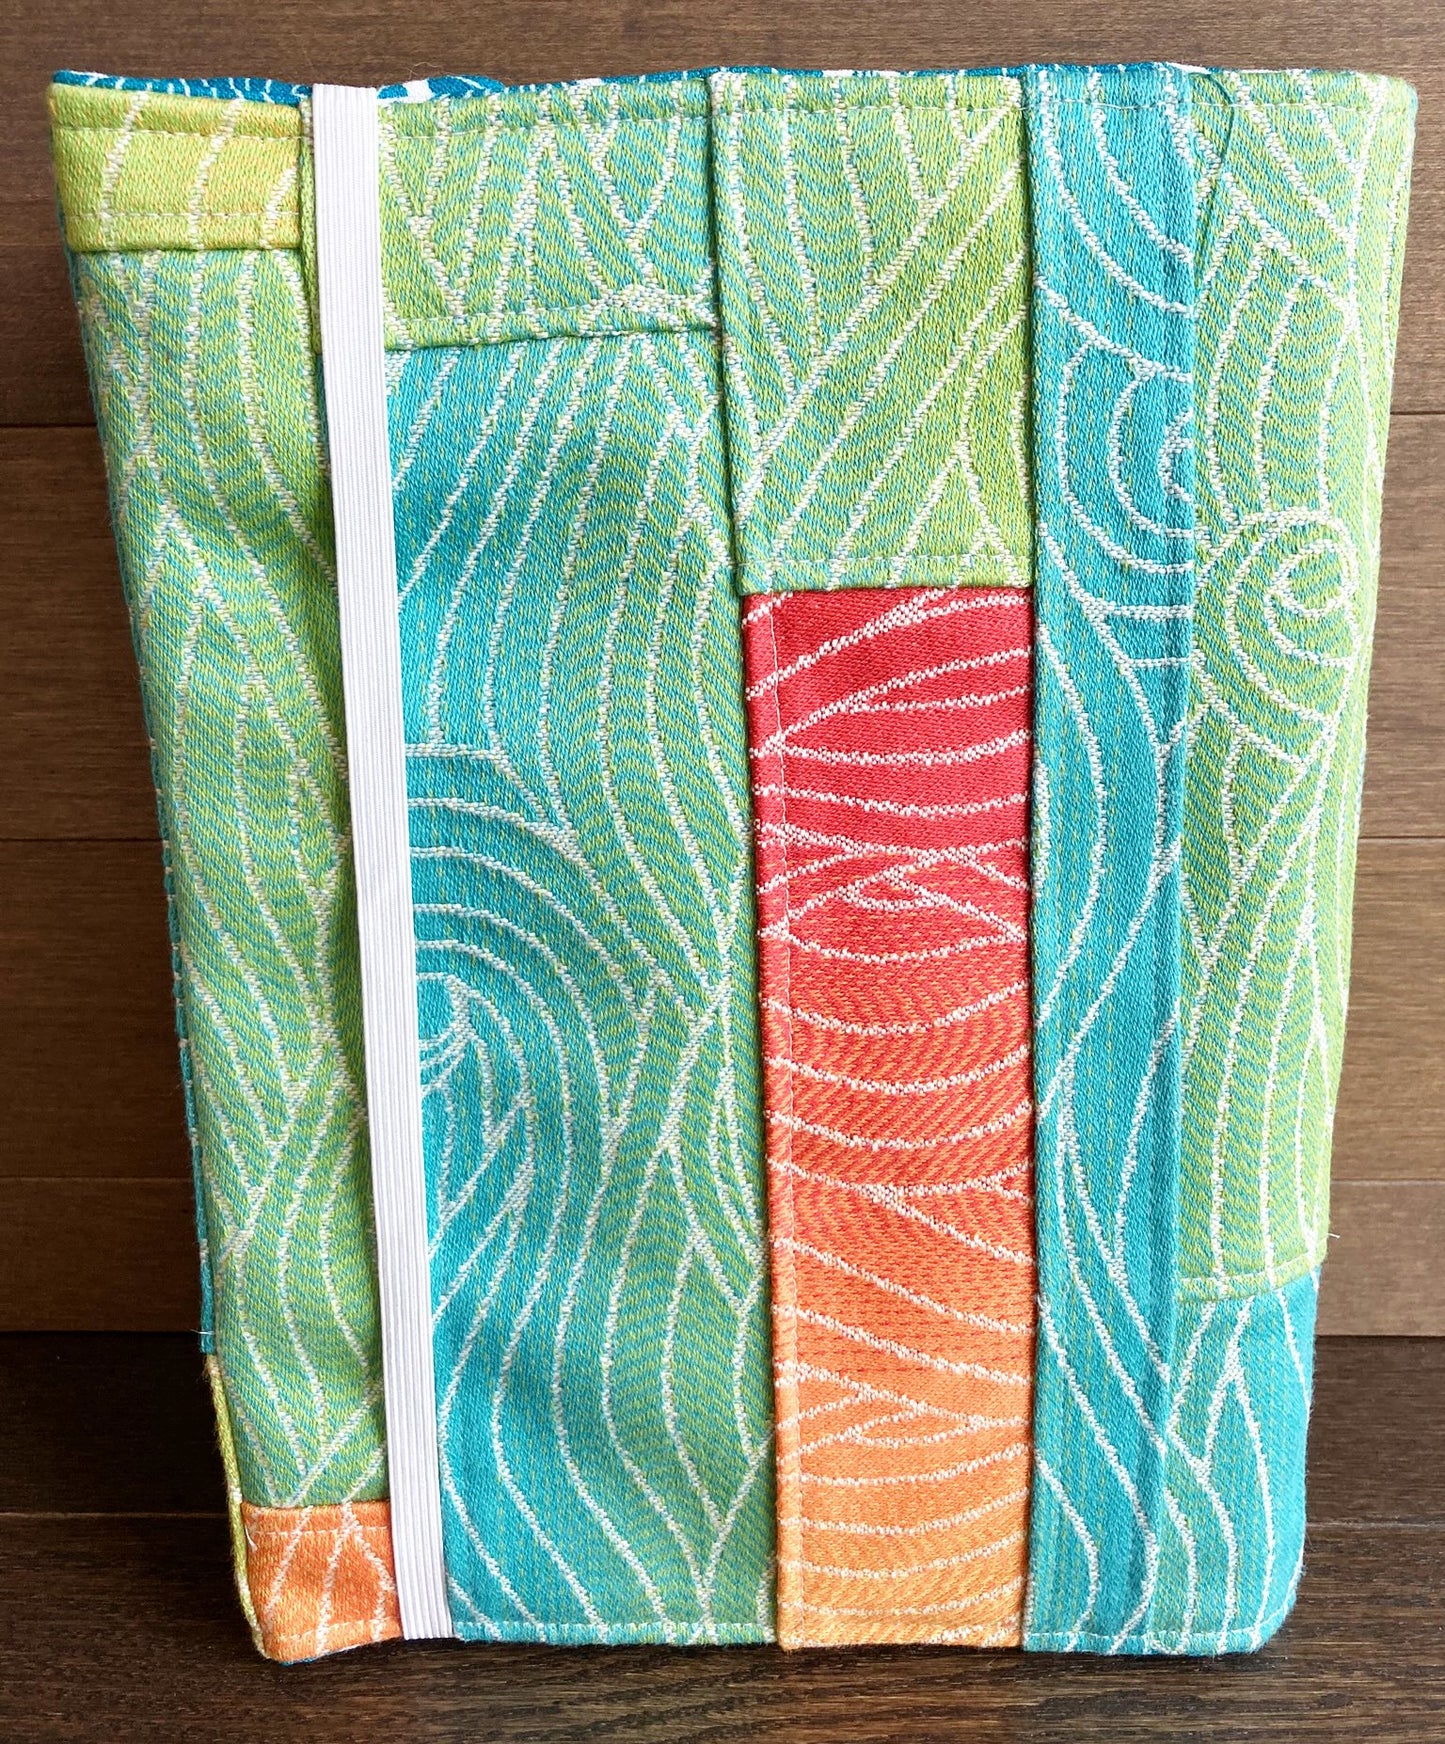 Leafy Sea Dragon Journal and Notebook Cover